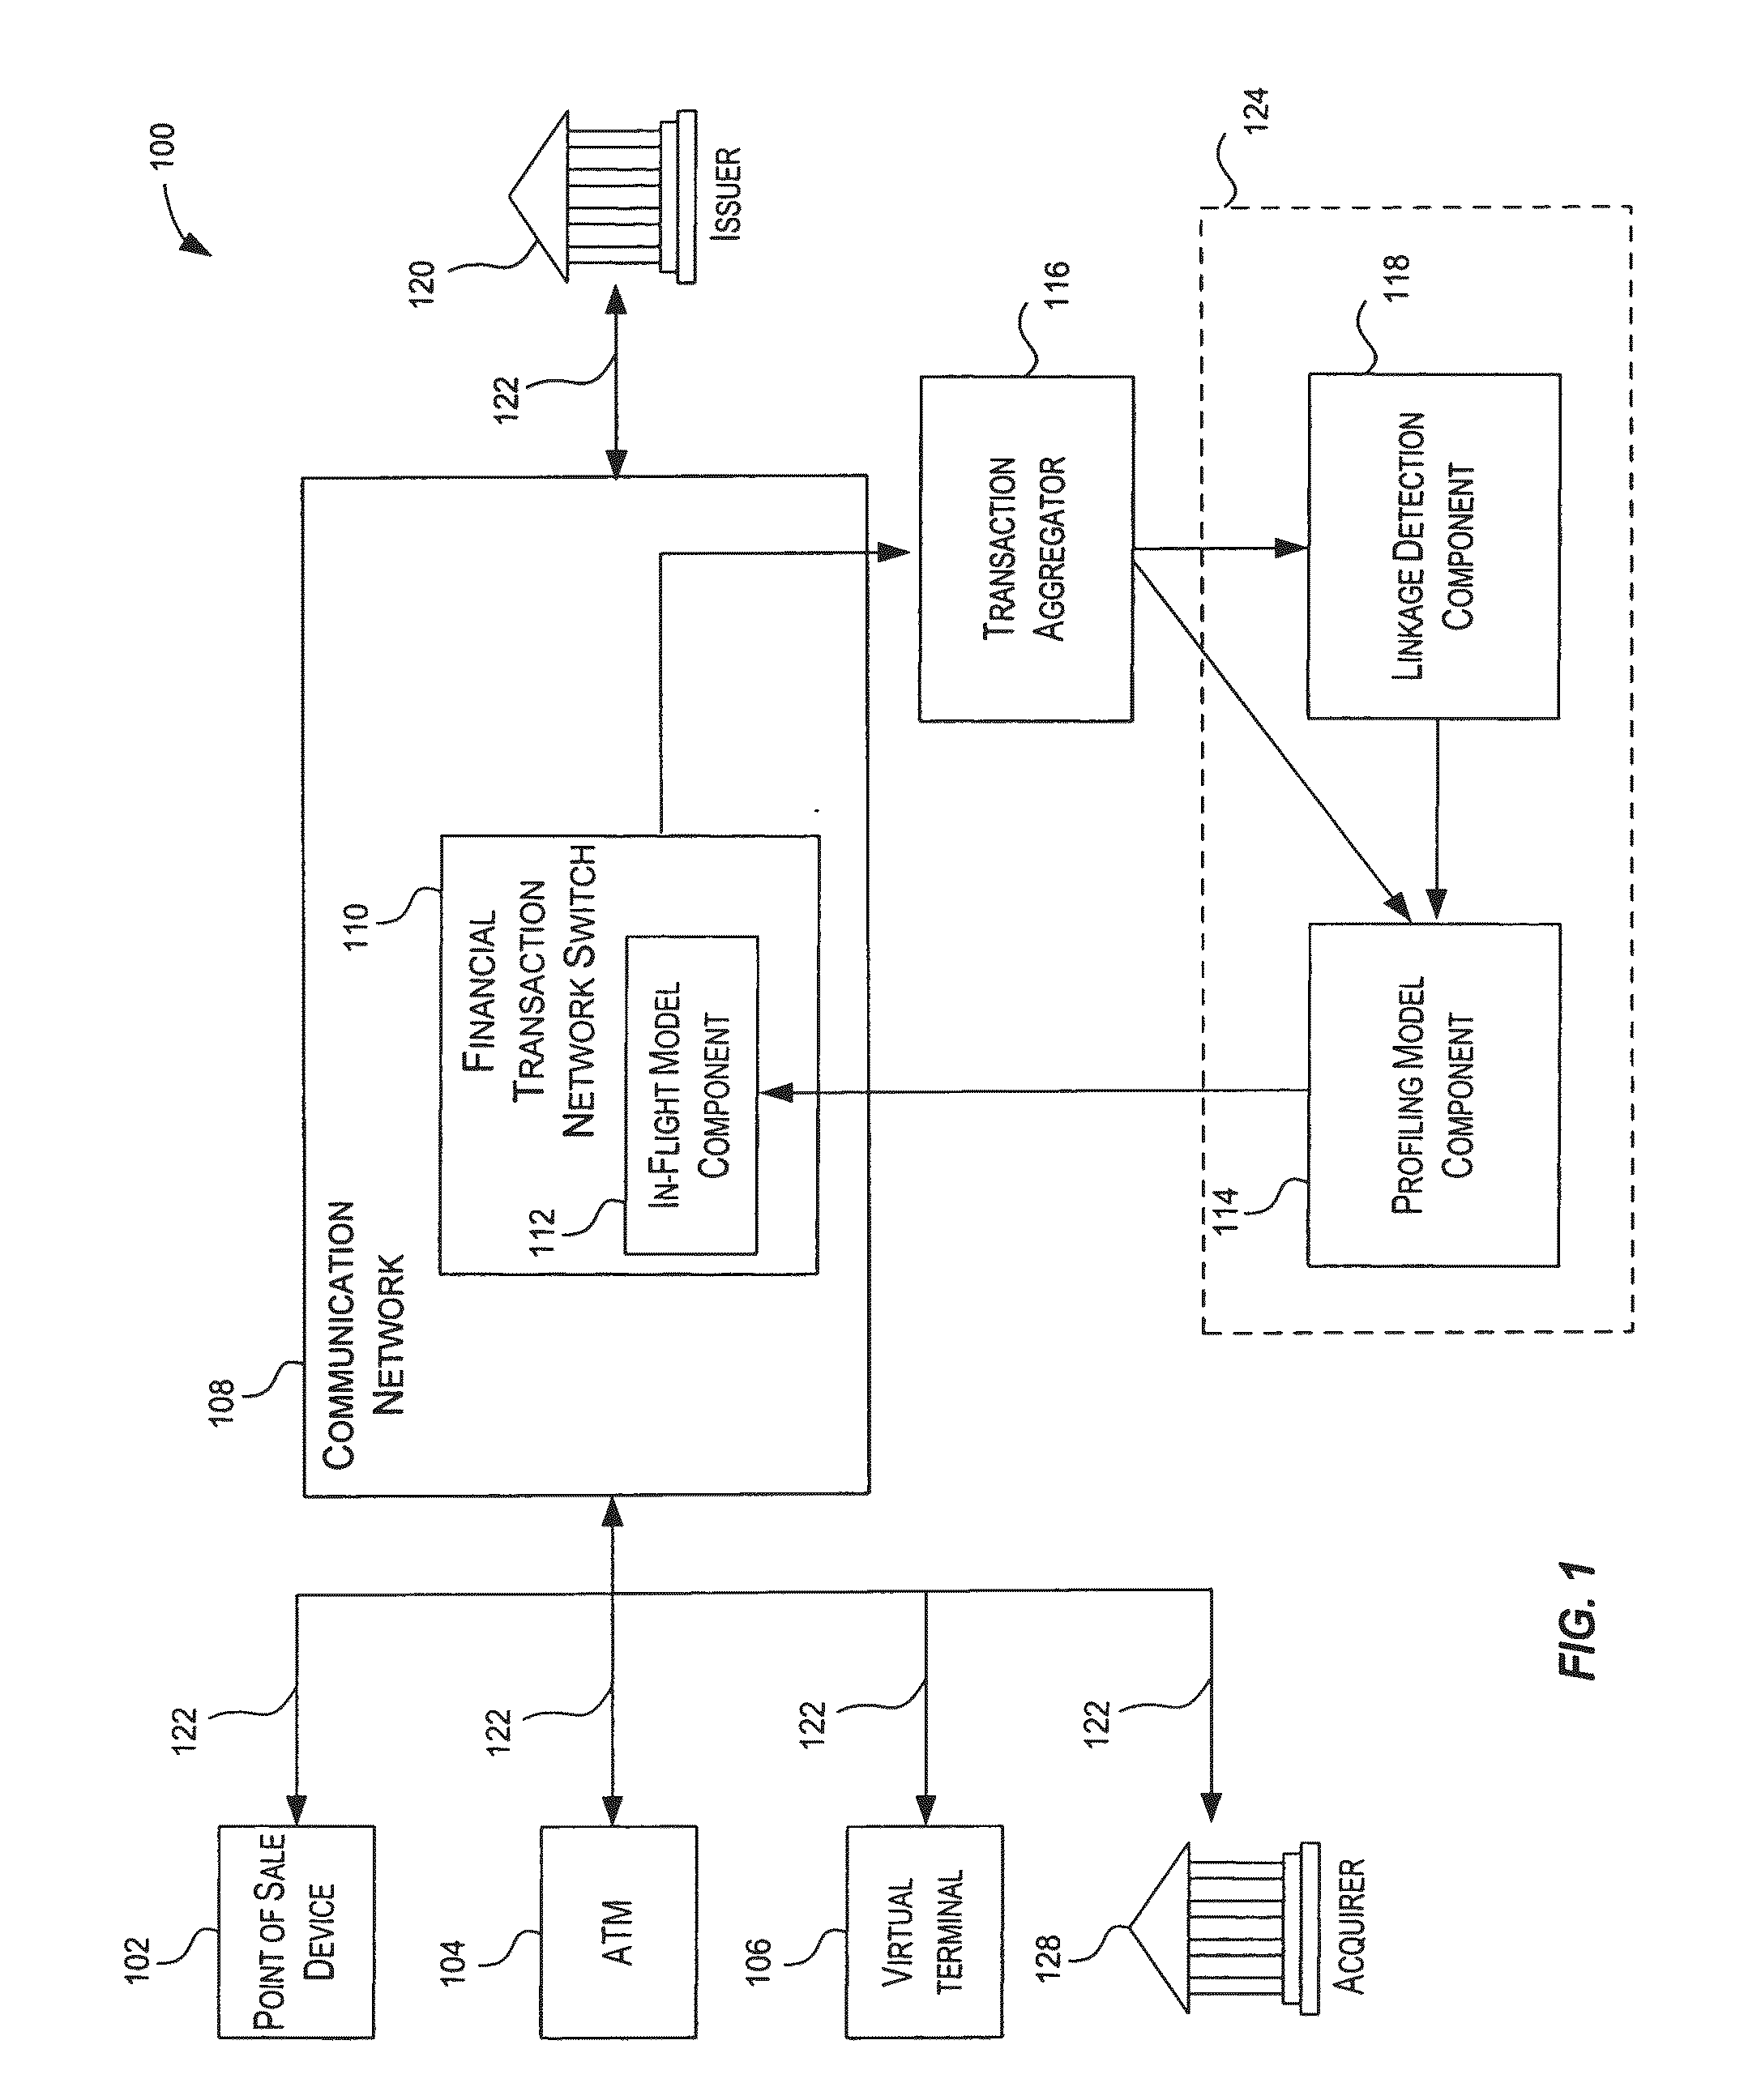 Method and System for Providing Risk Information in Connection with Transaction Processing